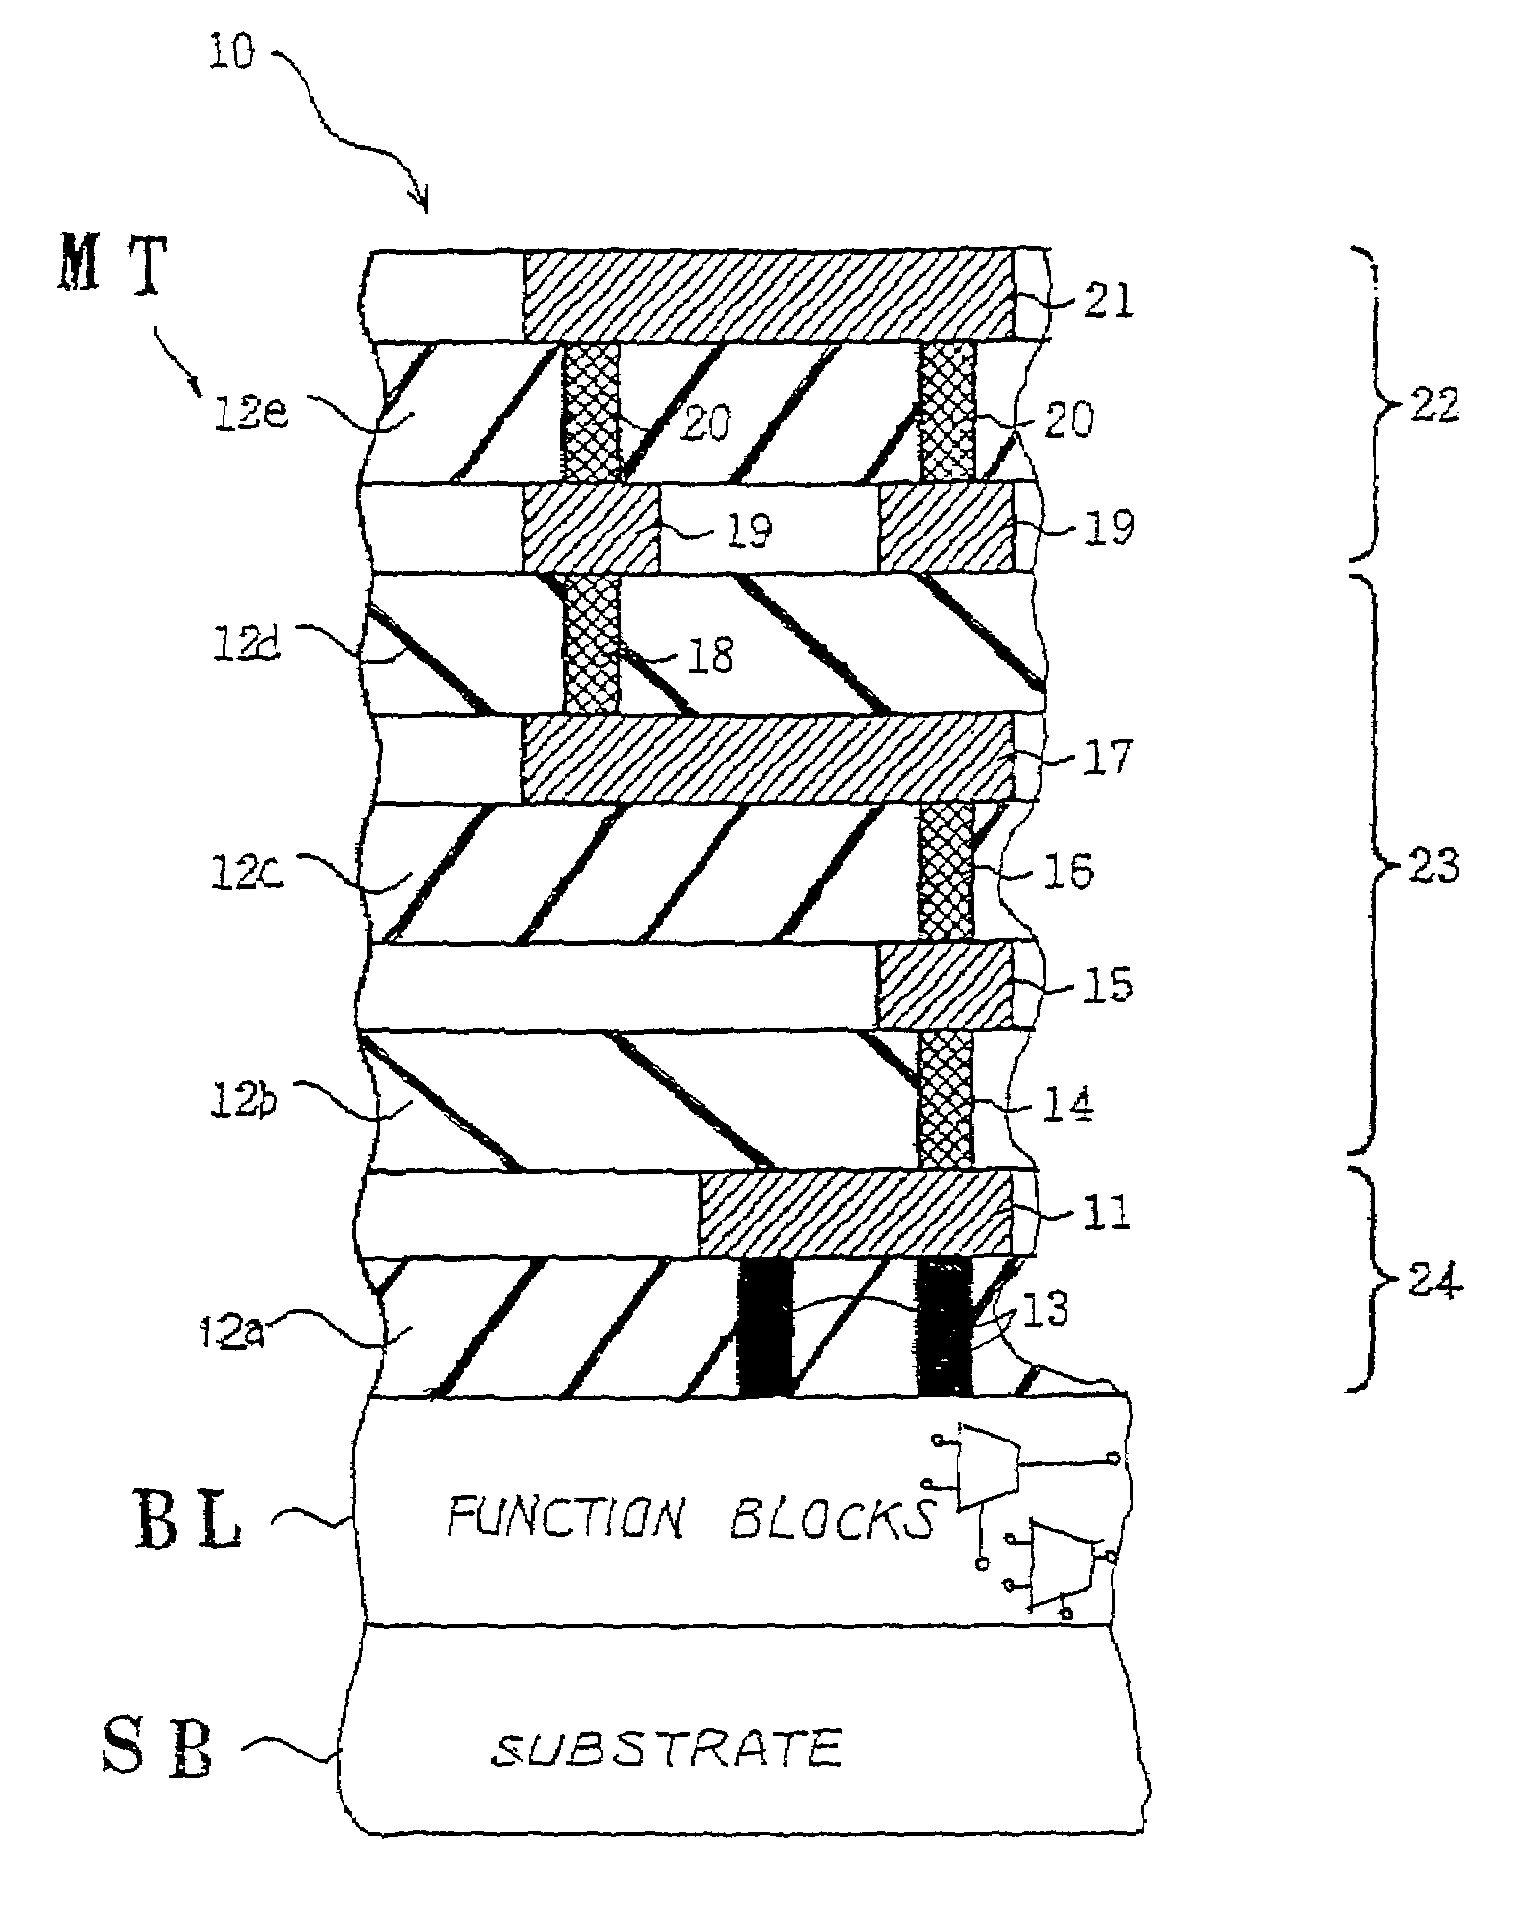 Semi-custom-made semiconductor integrated circuit device, method for customization and method for redesign